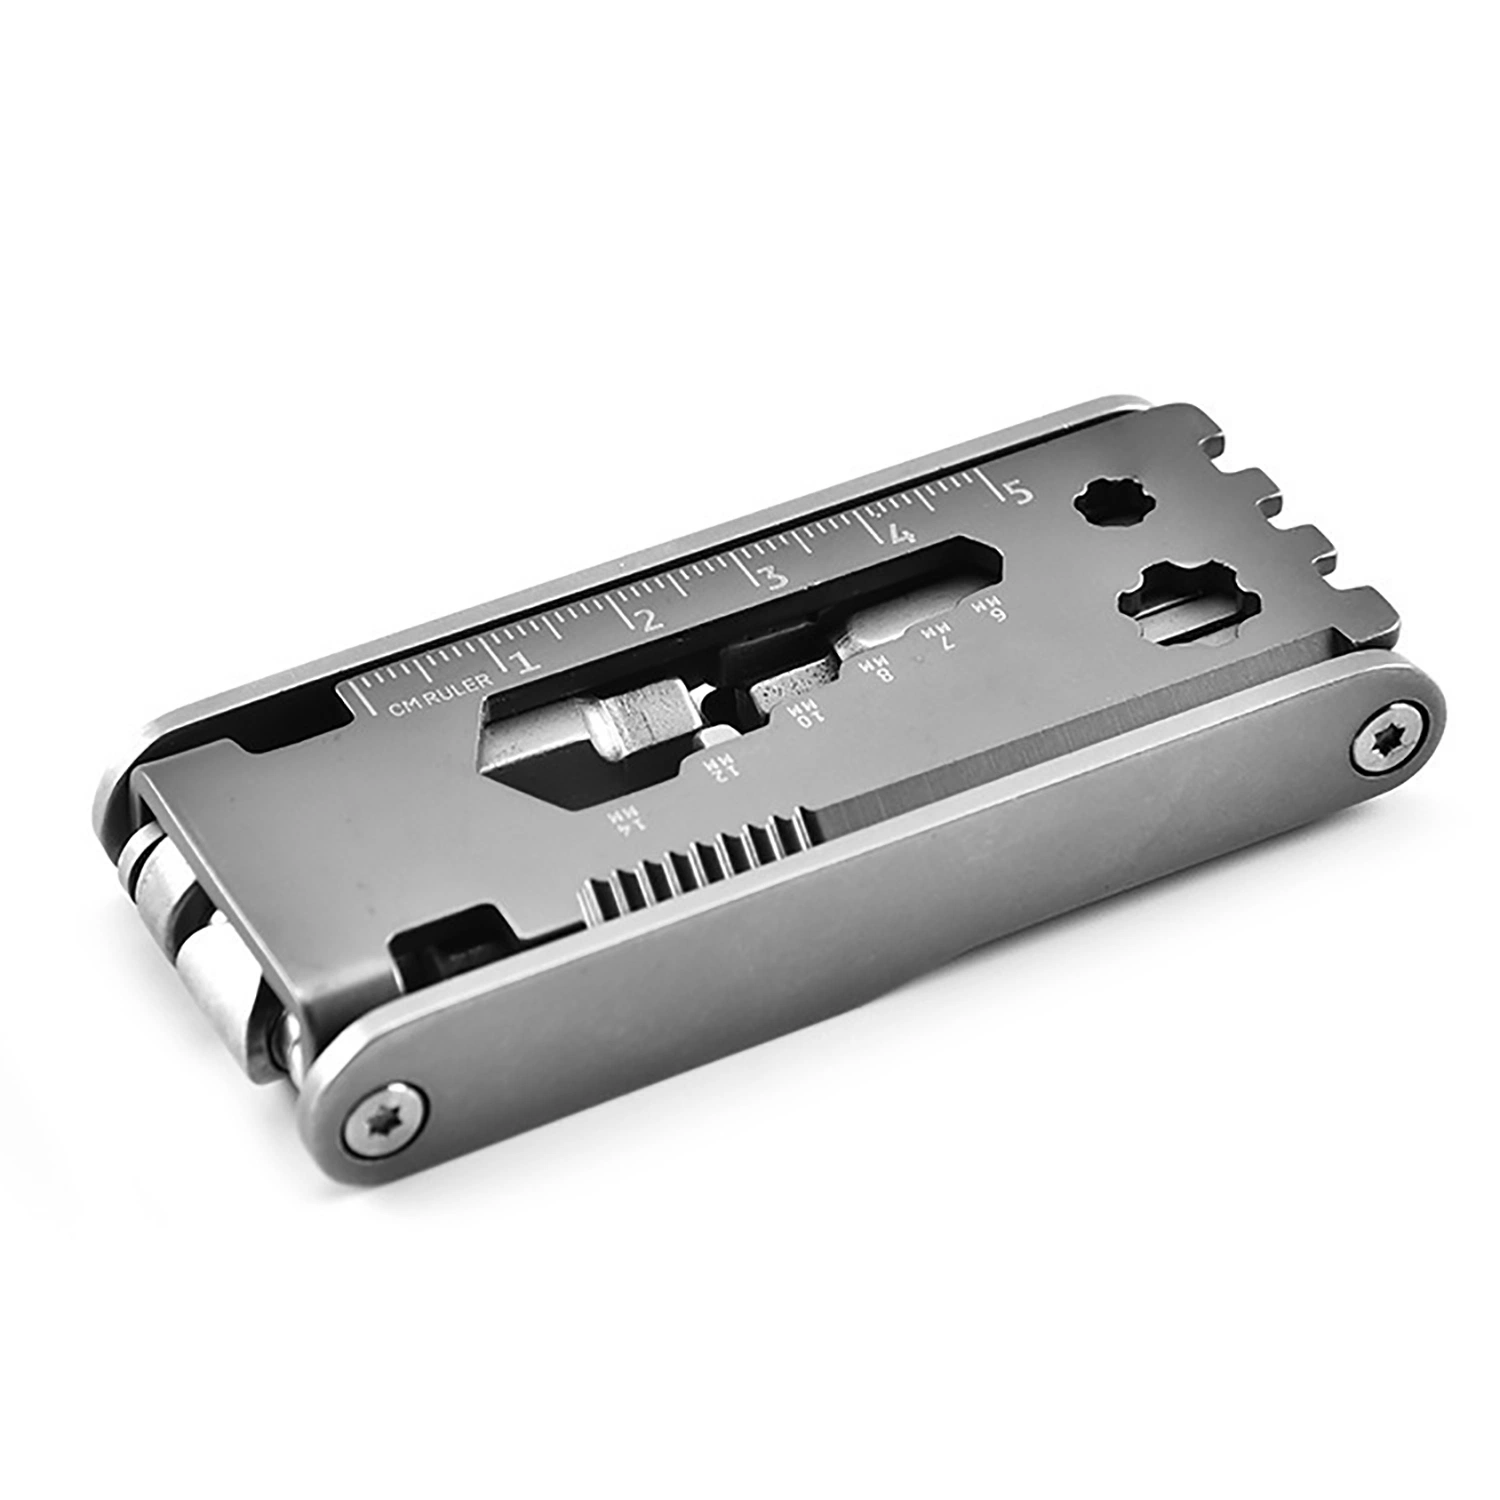 Stainless Steel Multi- Functional Portable Repair Tool Kit Wrench Ci22494